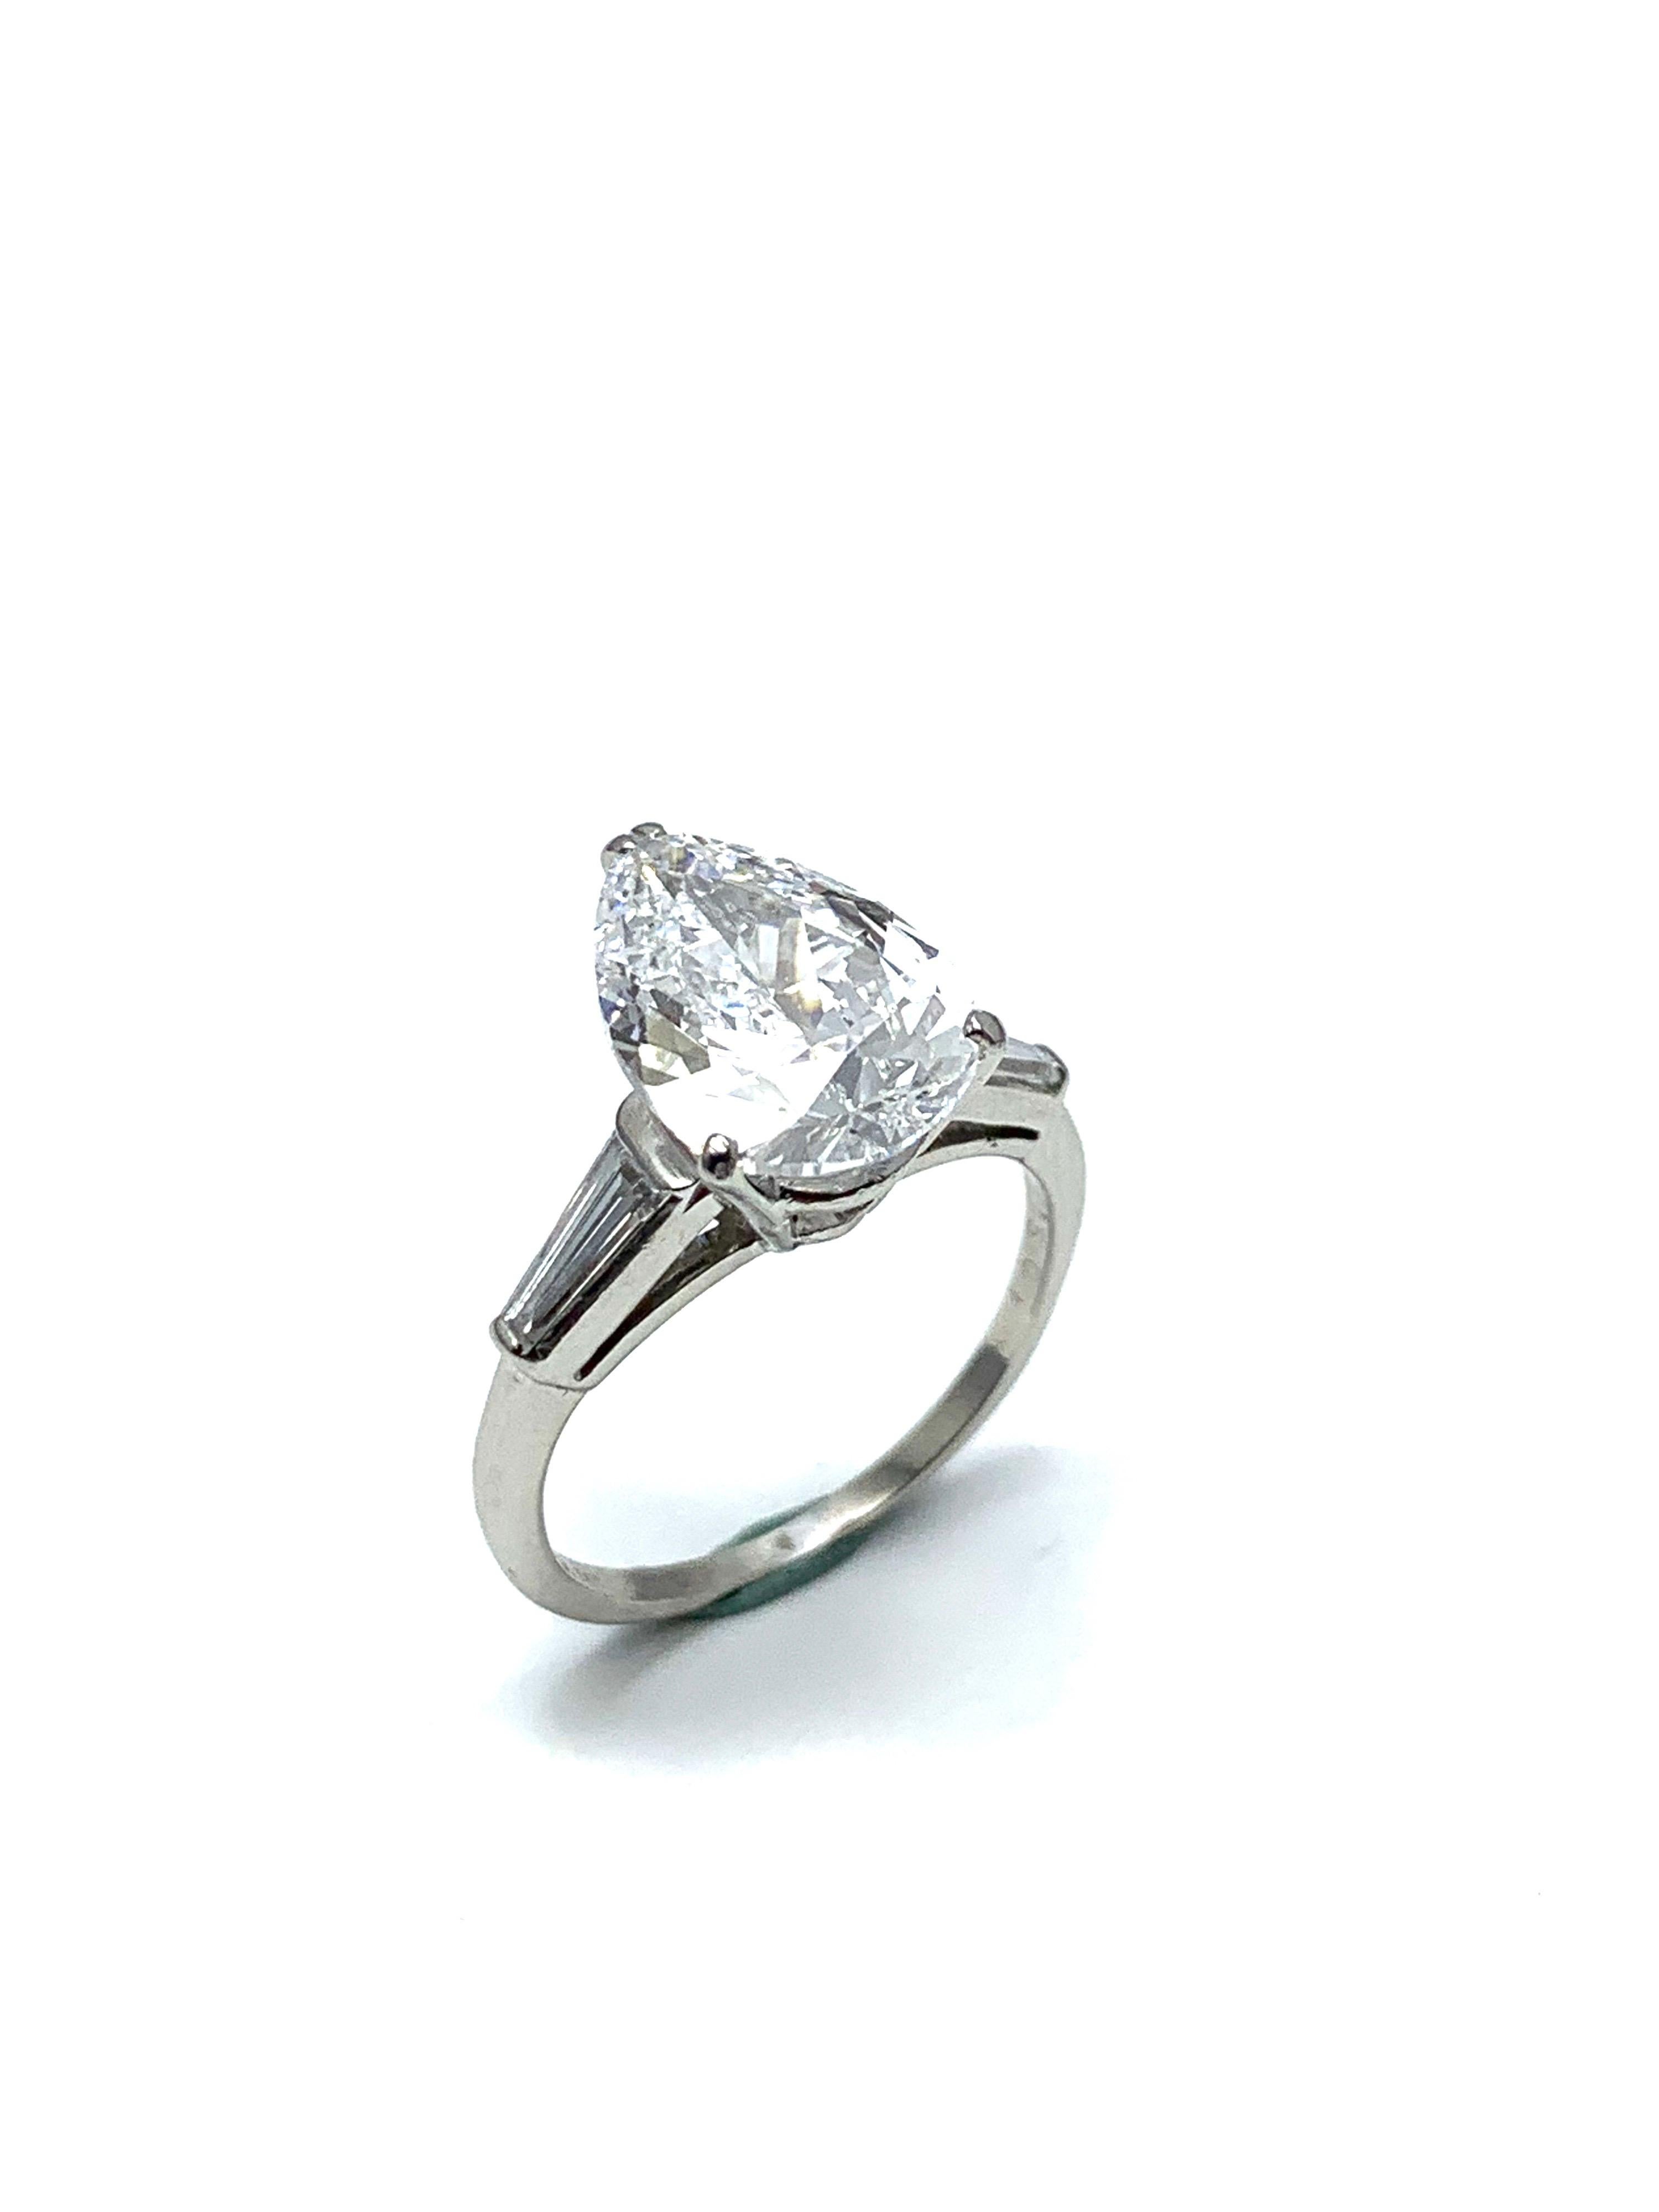 An absolutely stunning 3.14 carat pear shape Diamond and platinum ring. The pear shape is set in a four prong basket setting, with a tapered baguette Diamond on each side tapering into the shank. The 3.14 carat Diamond is graded by GIA as a D color,